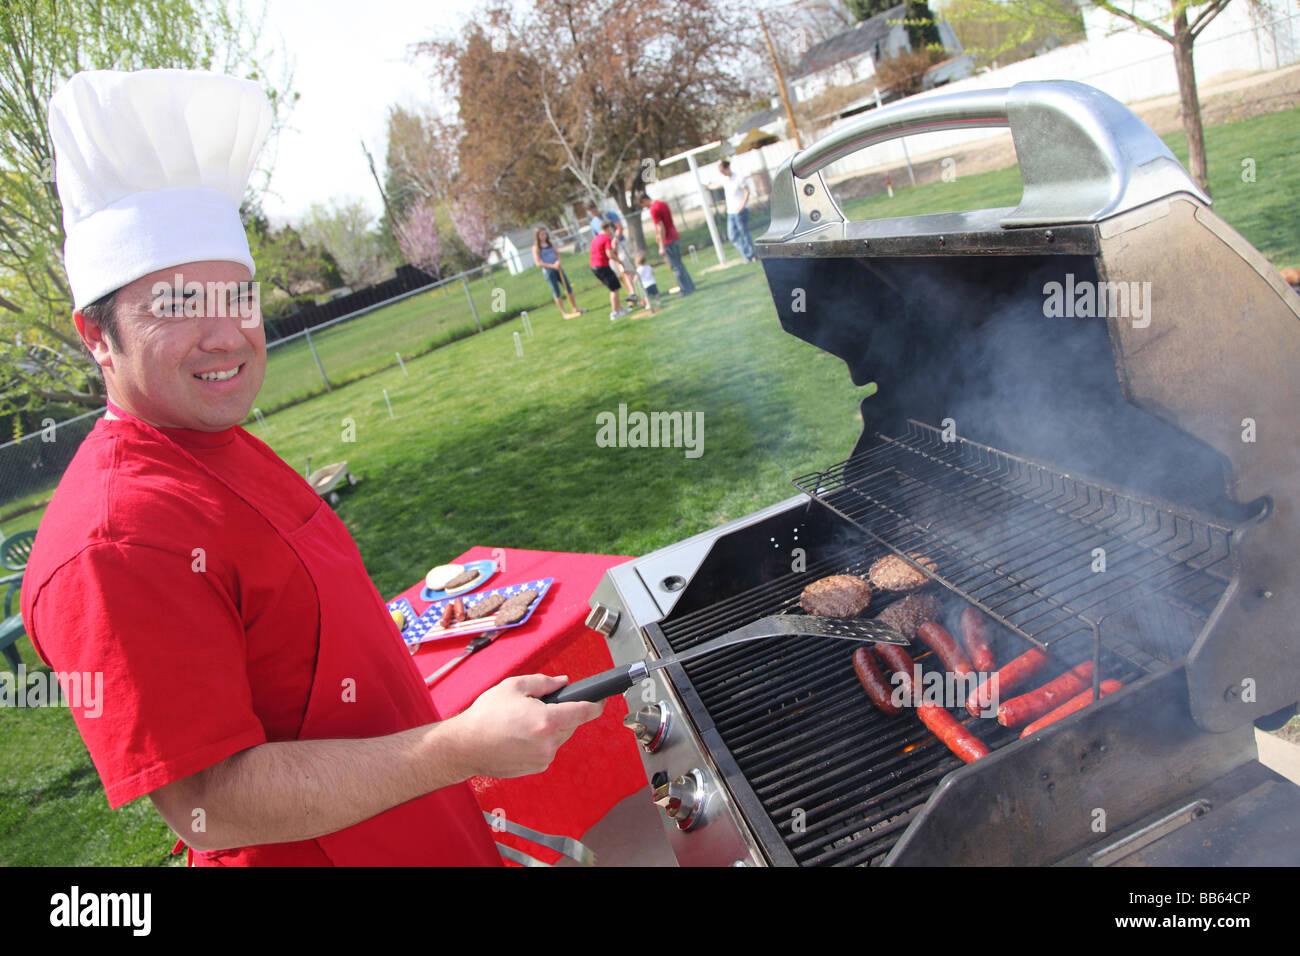 Man cooking at a 4th of July Barbecue Stock Photo